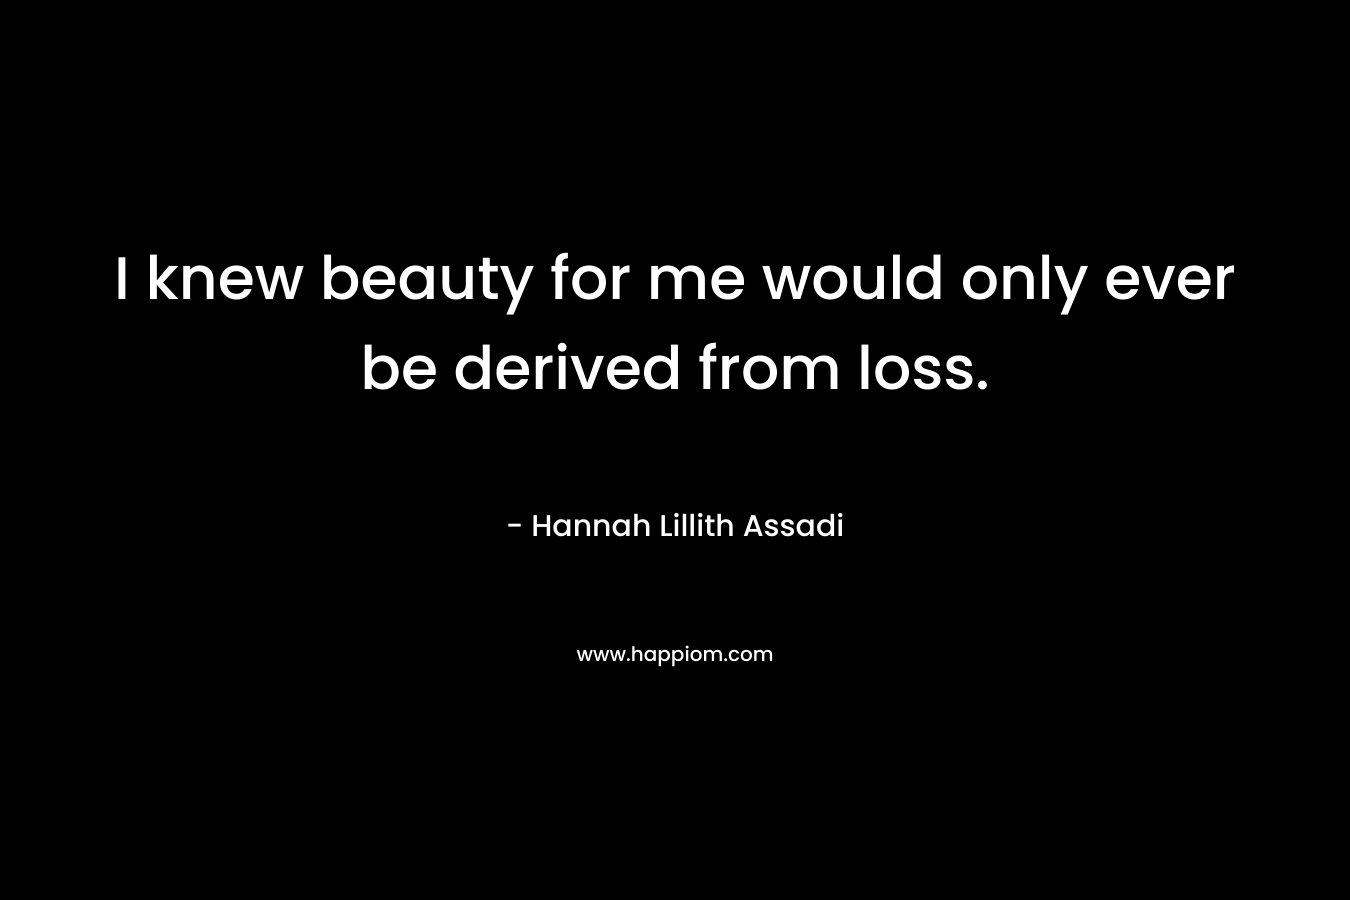 I knew beauty for me would only ever be derived from loss. – Hannah Lillith Assadi